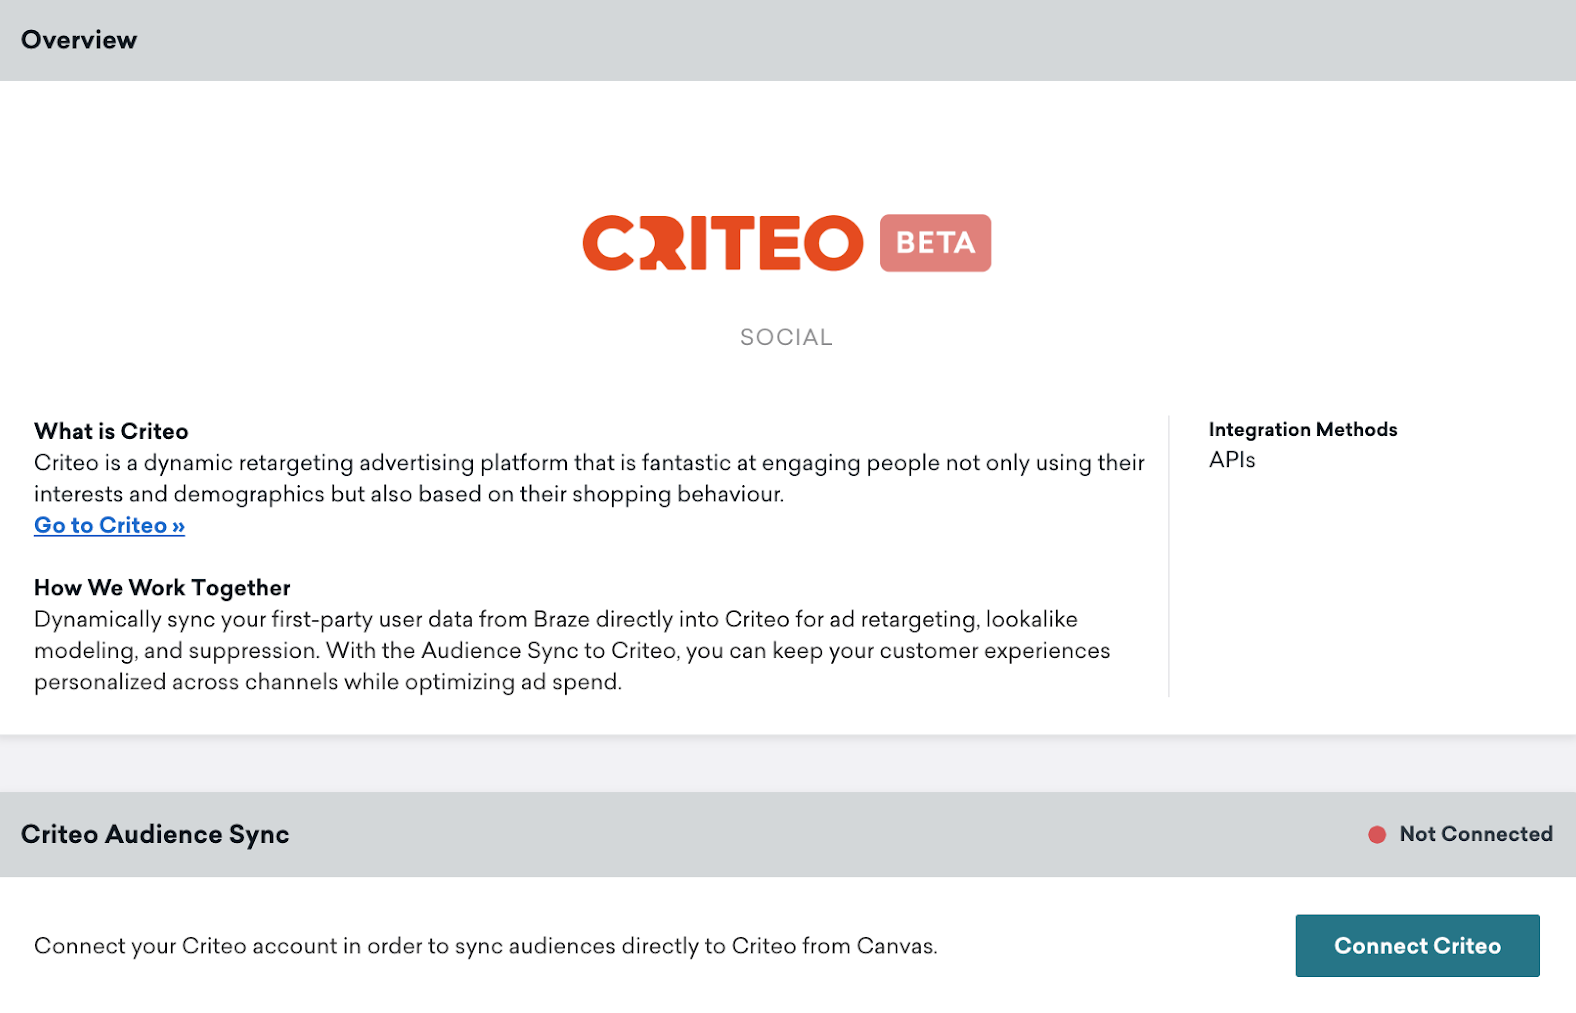 Criteo technology page in Braze that includes an Overview module and Criteo module with the Connected Criteo button.